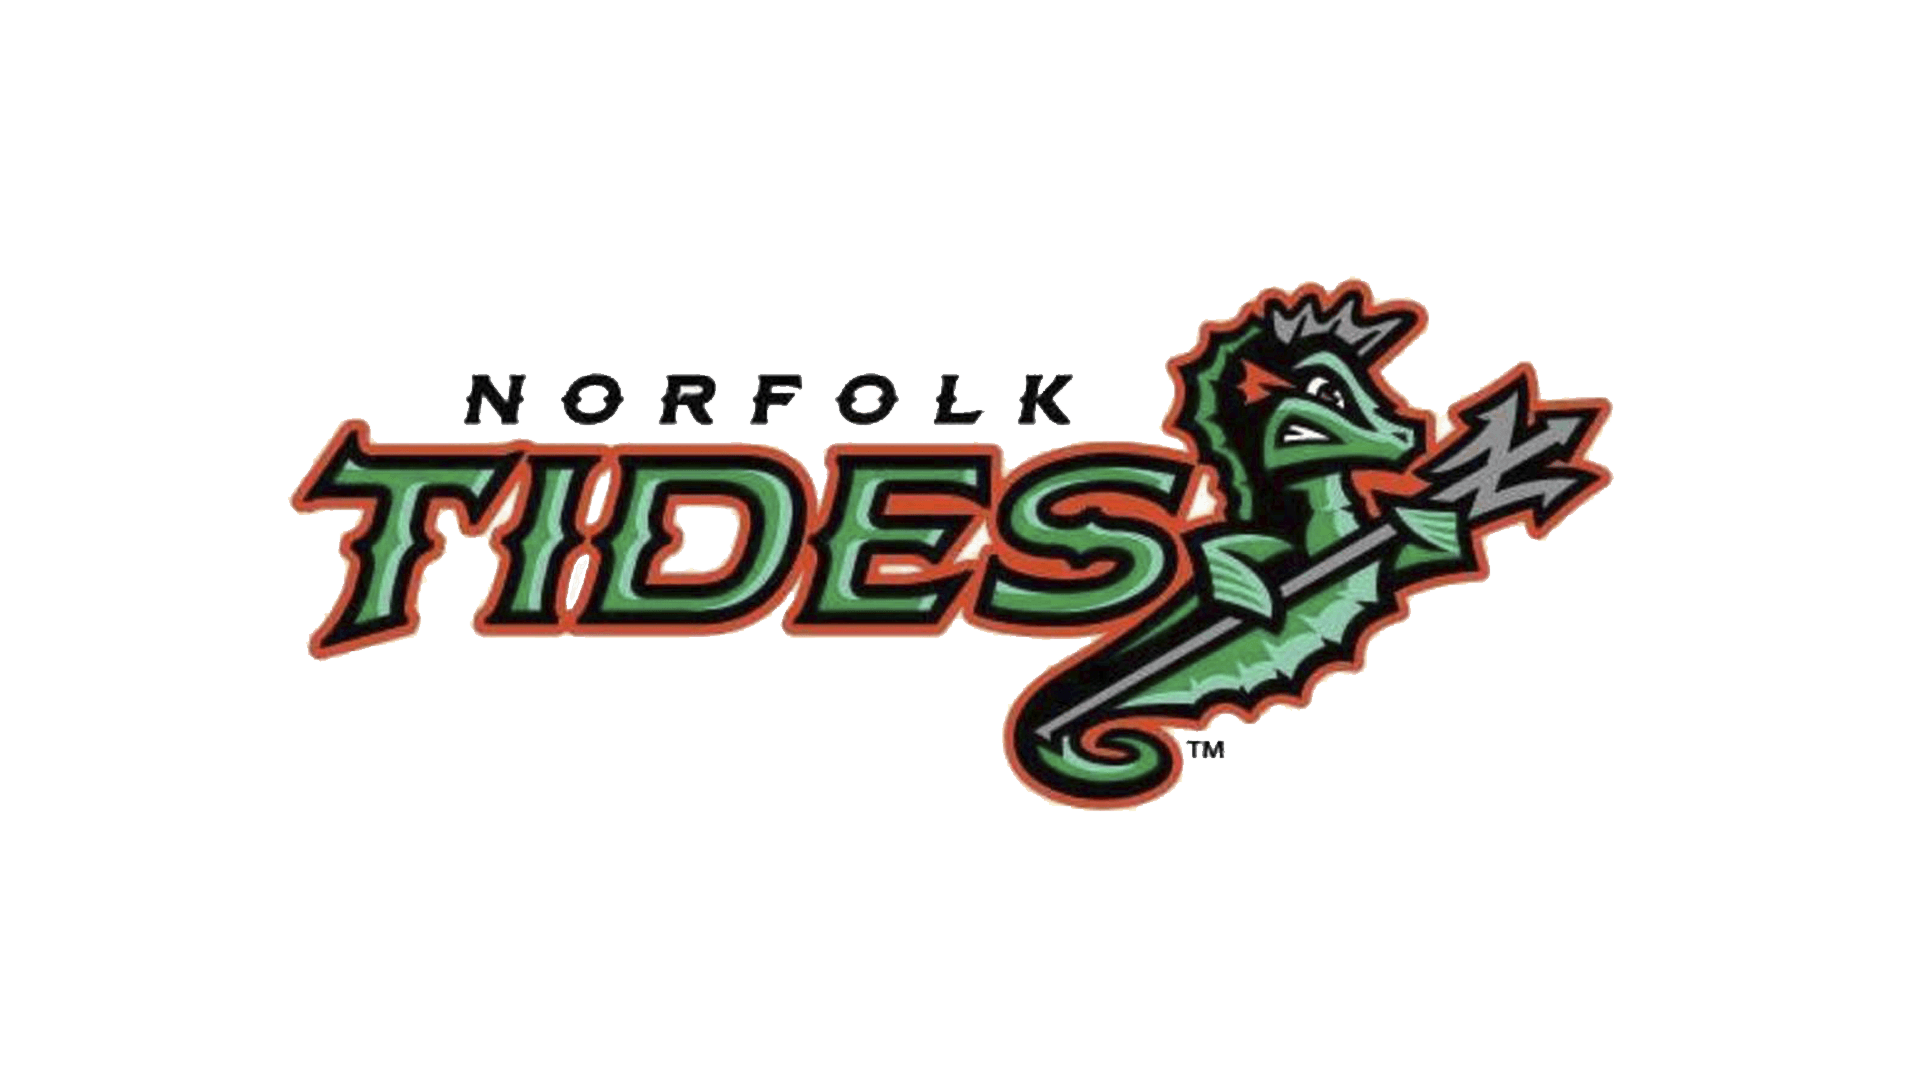 Norfolk Tides Logo - Norfolk Tides logo, Norfolk Tides Symbol, Meaning, History and Evolution